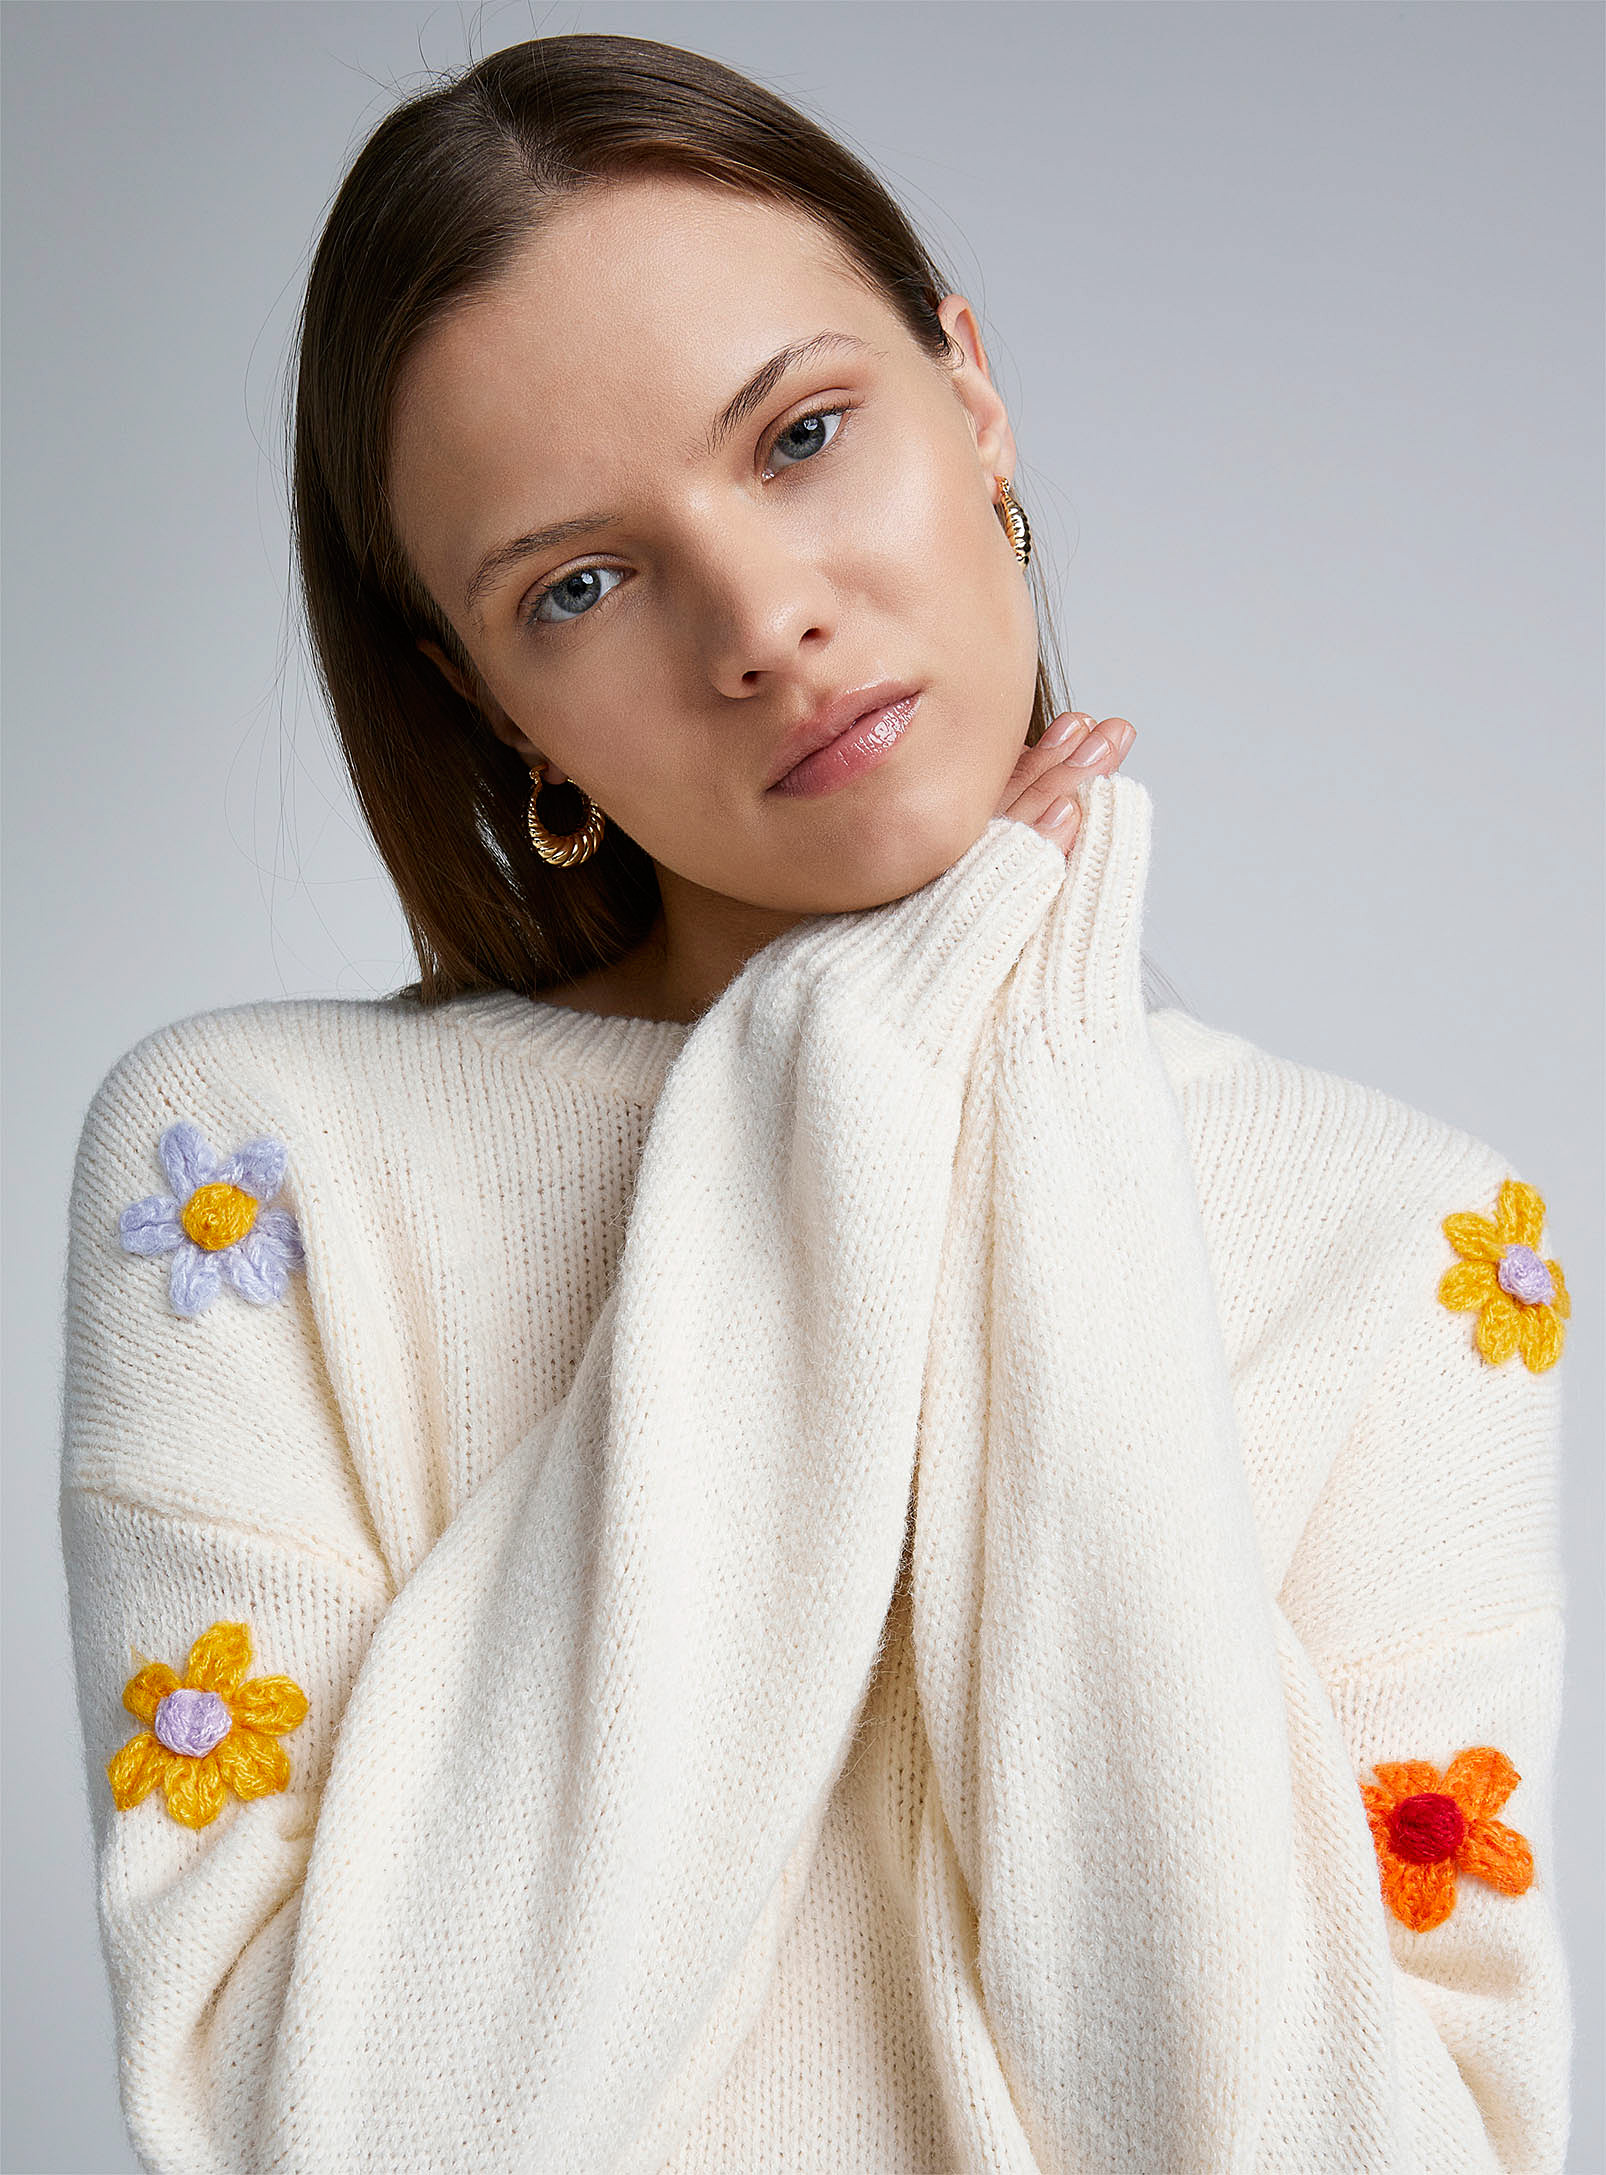 Twik Colourful Flowers Sweater In Ivory White